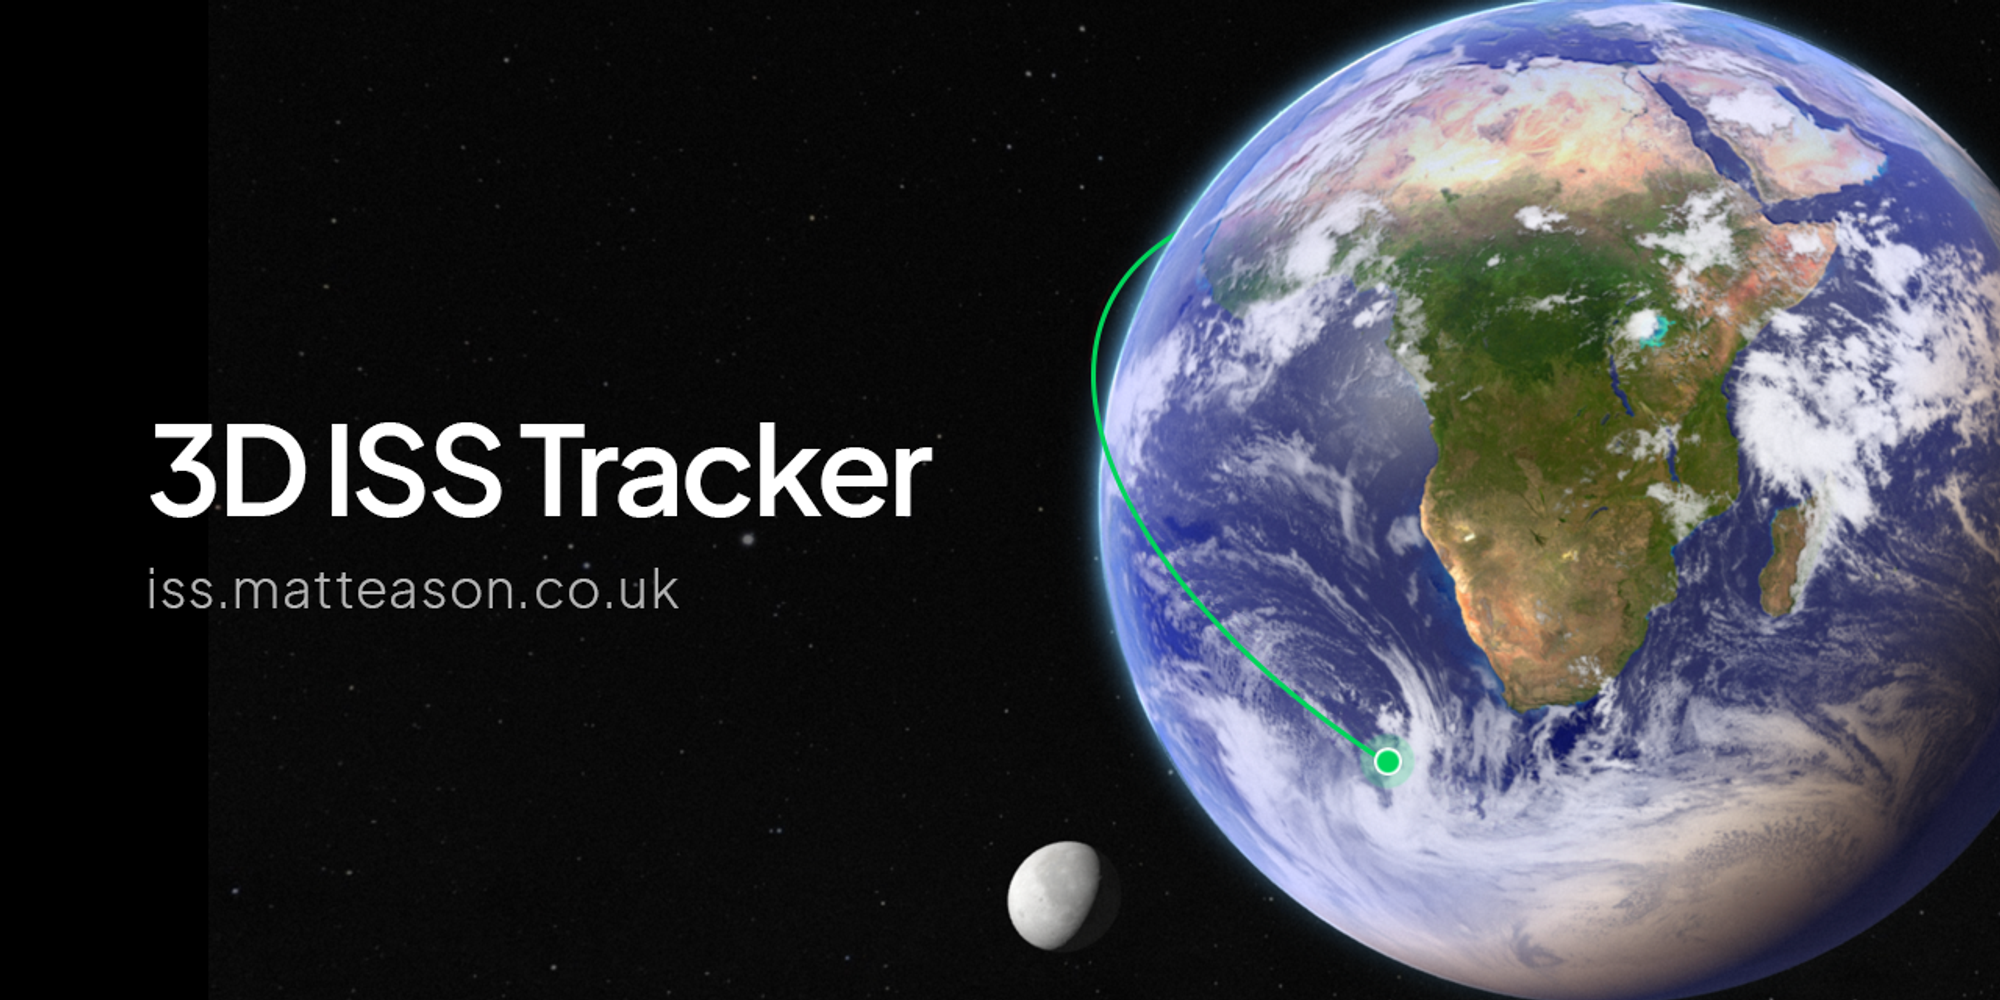 3D ISS Tracker: See the ISS on a beautiful 3D globe